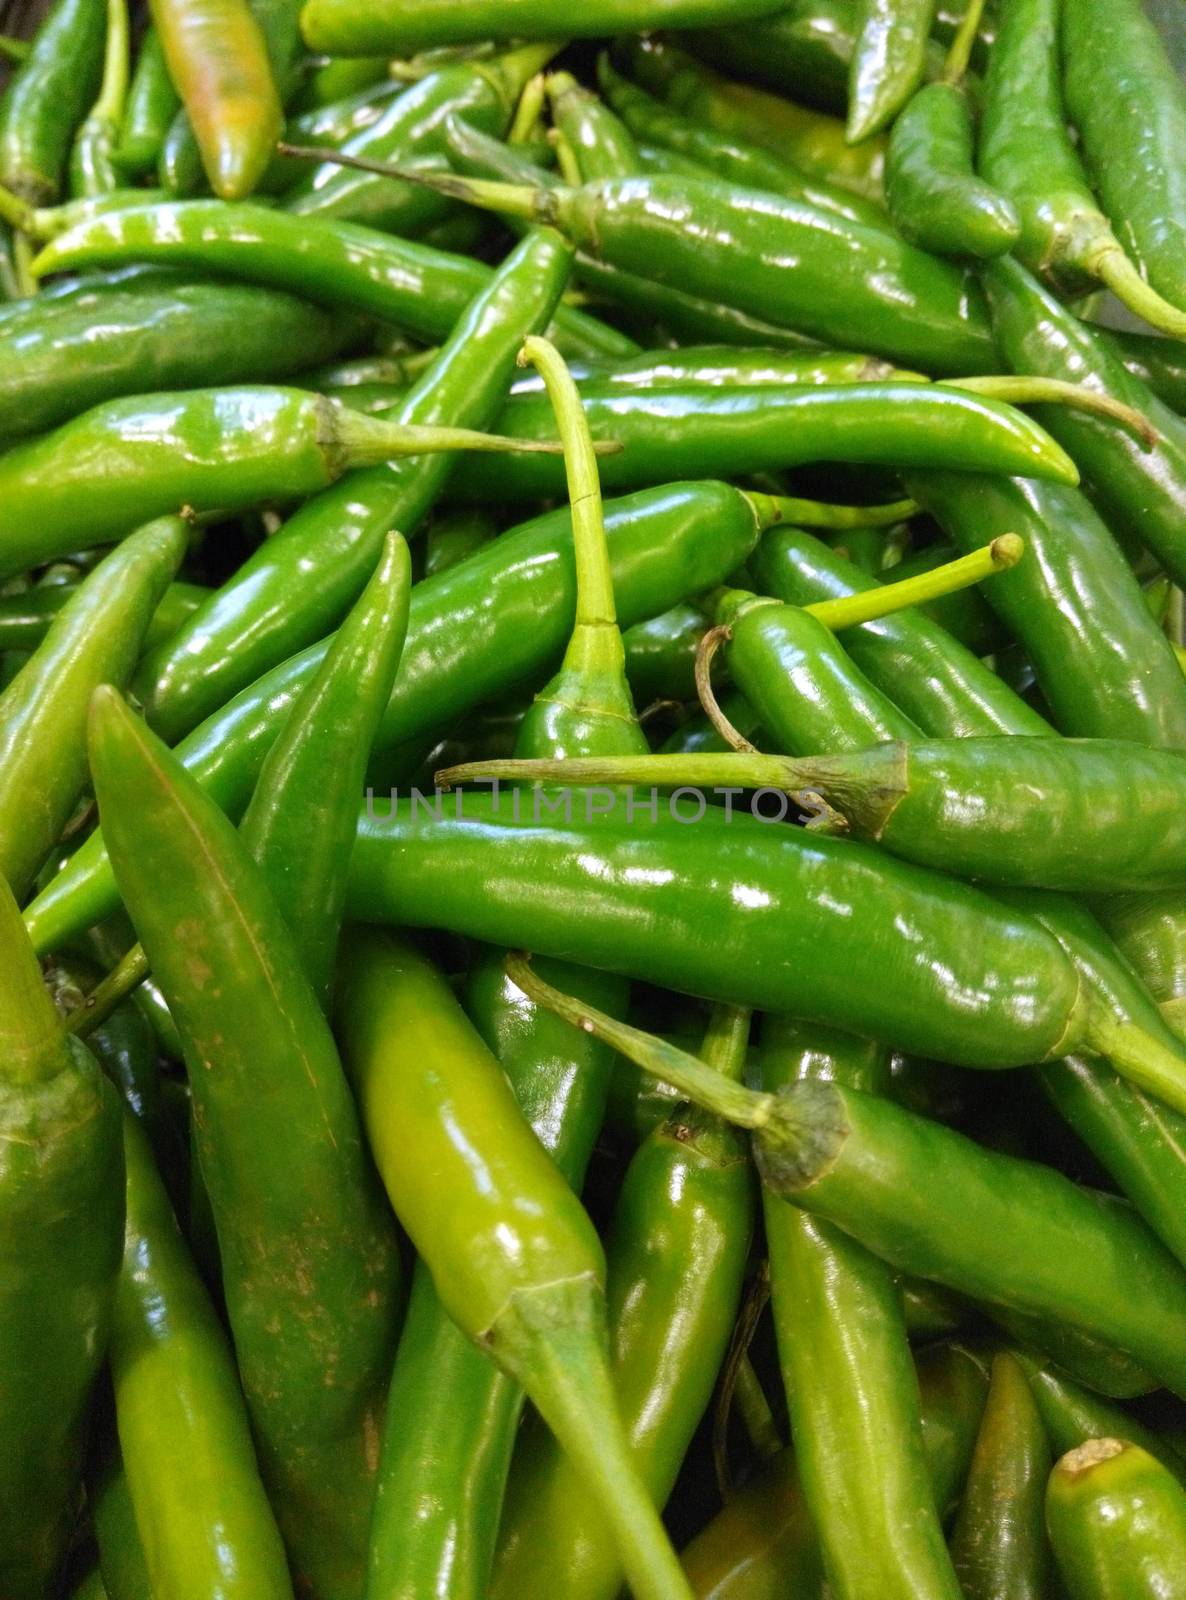 Green and Red Chillies are used extensively in many parts of Indian cuisine.